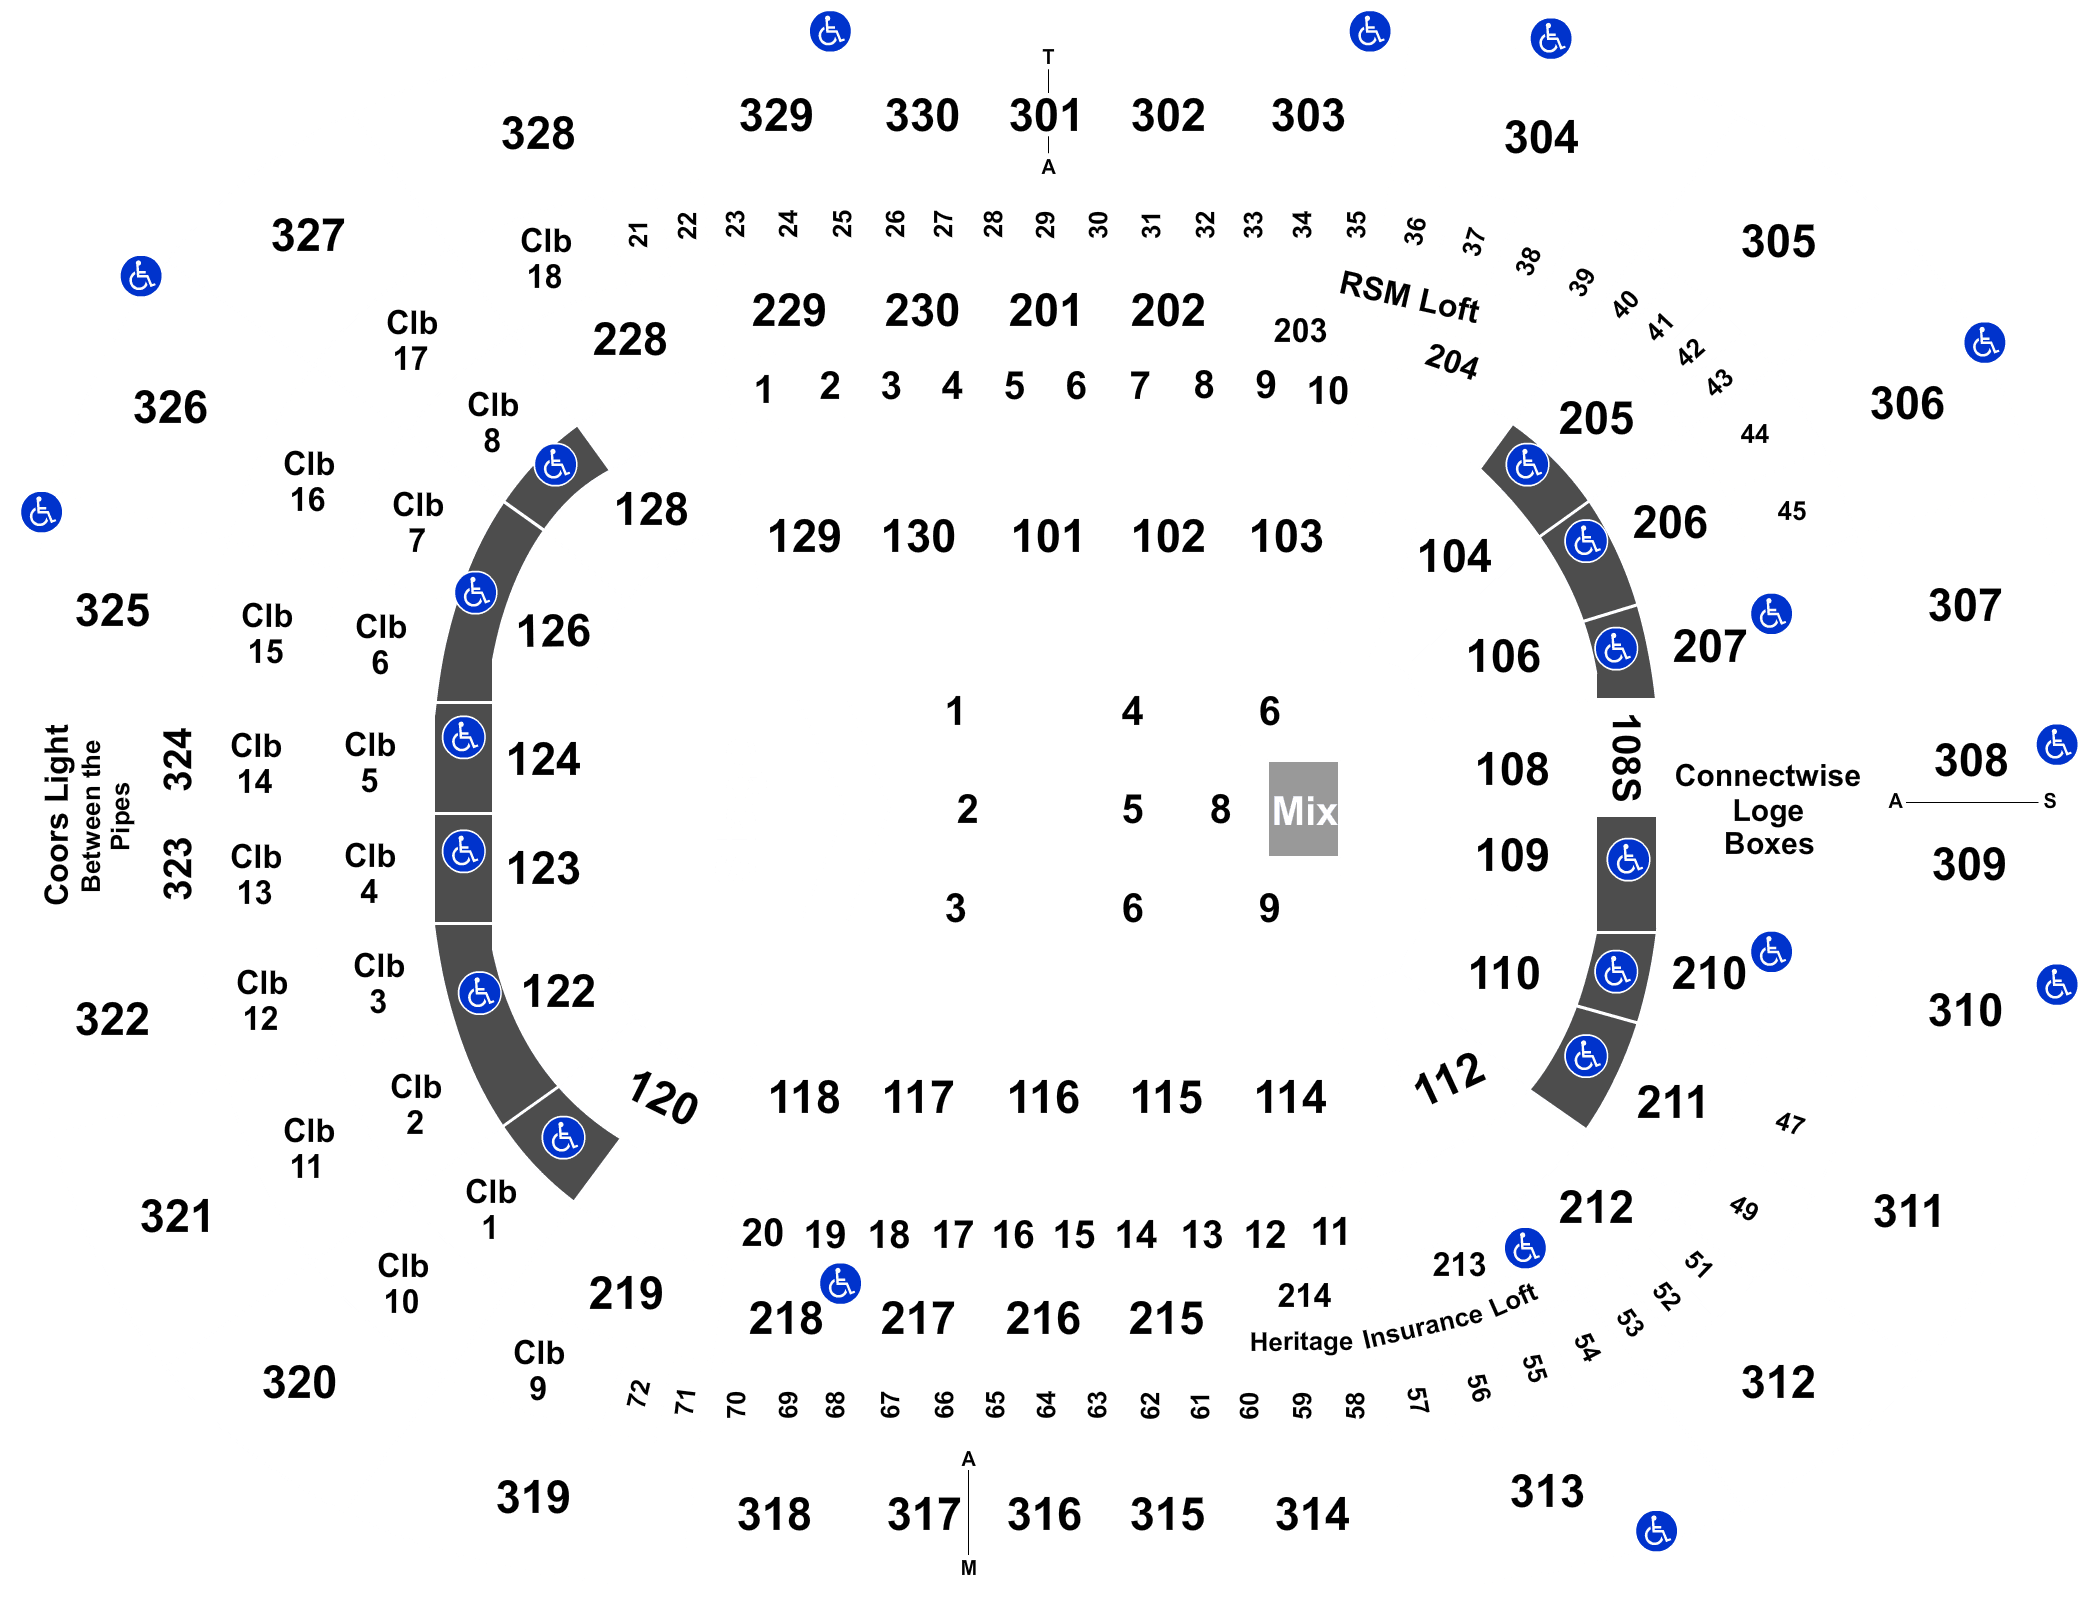 Amalie Arena's fixed stadium seating manufactured by Irwin Seating